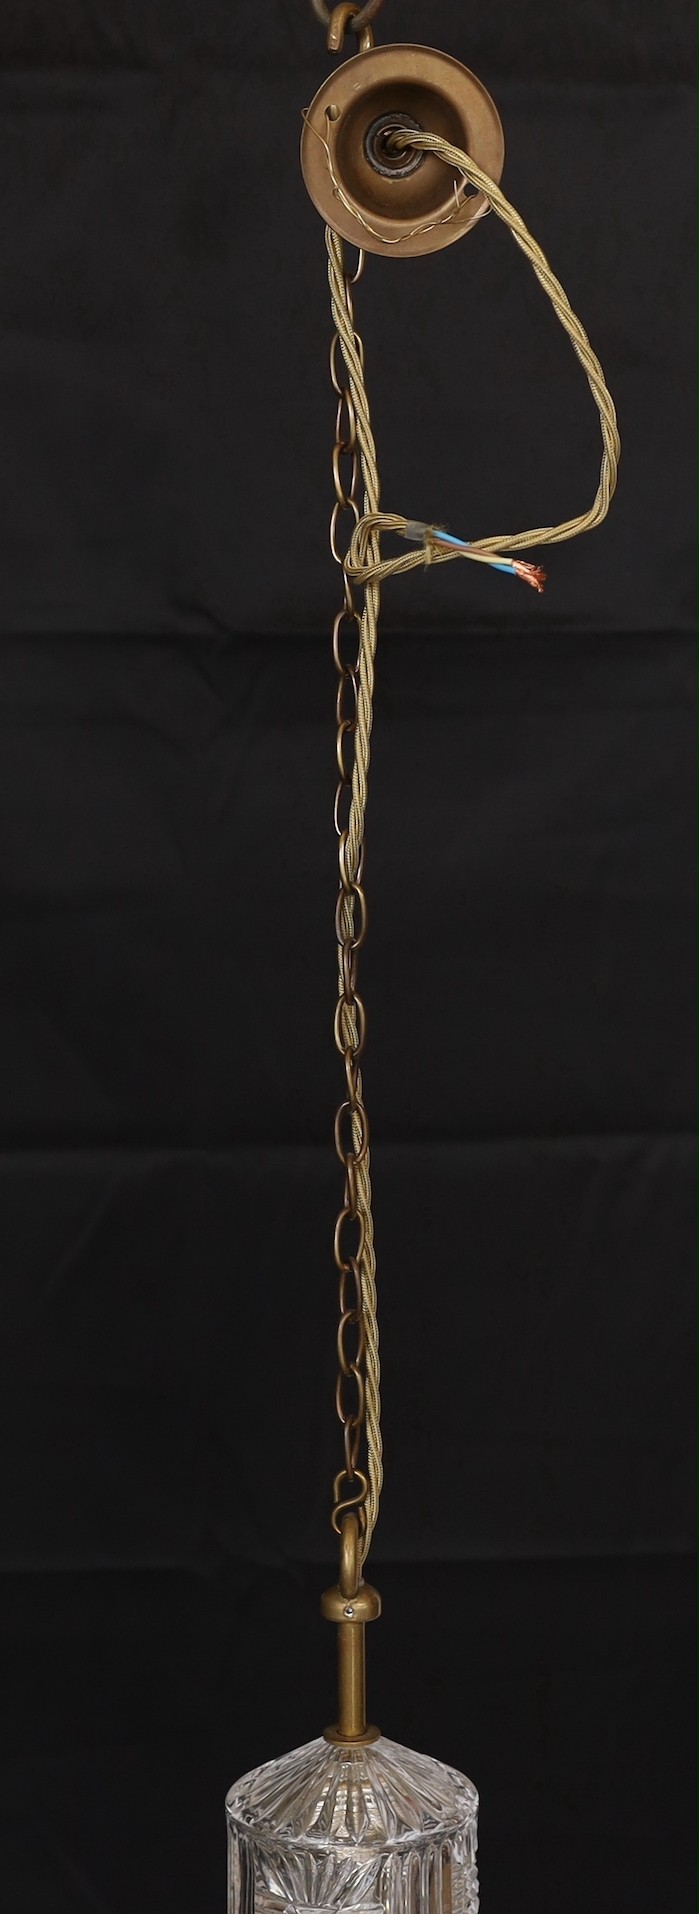 An early 20th century English brass and glass light pendant, height 26cm